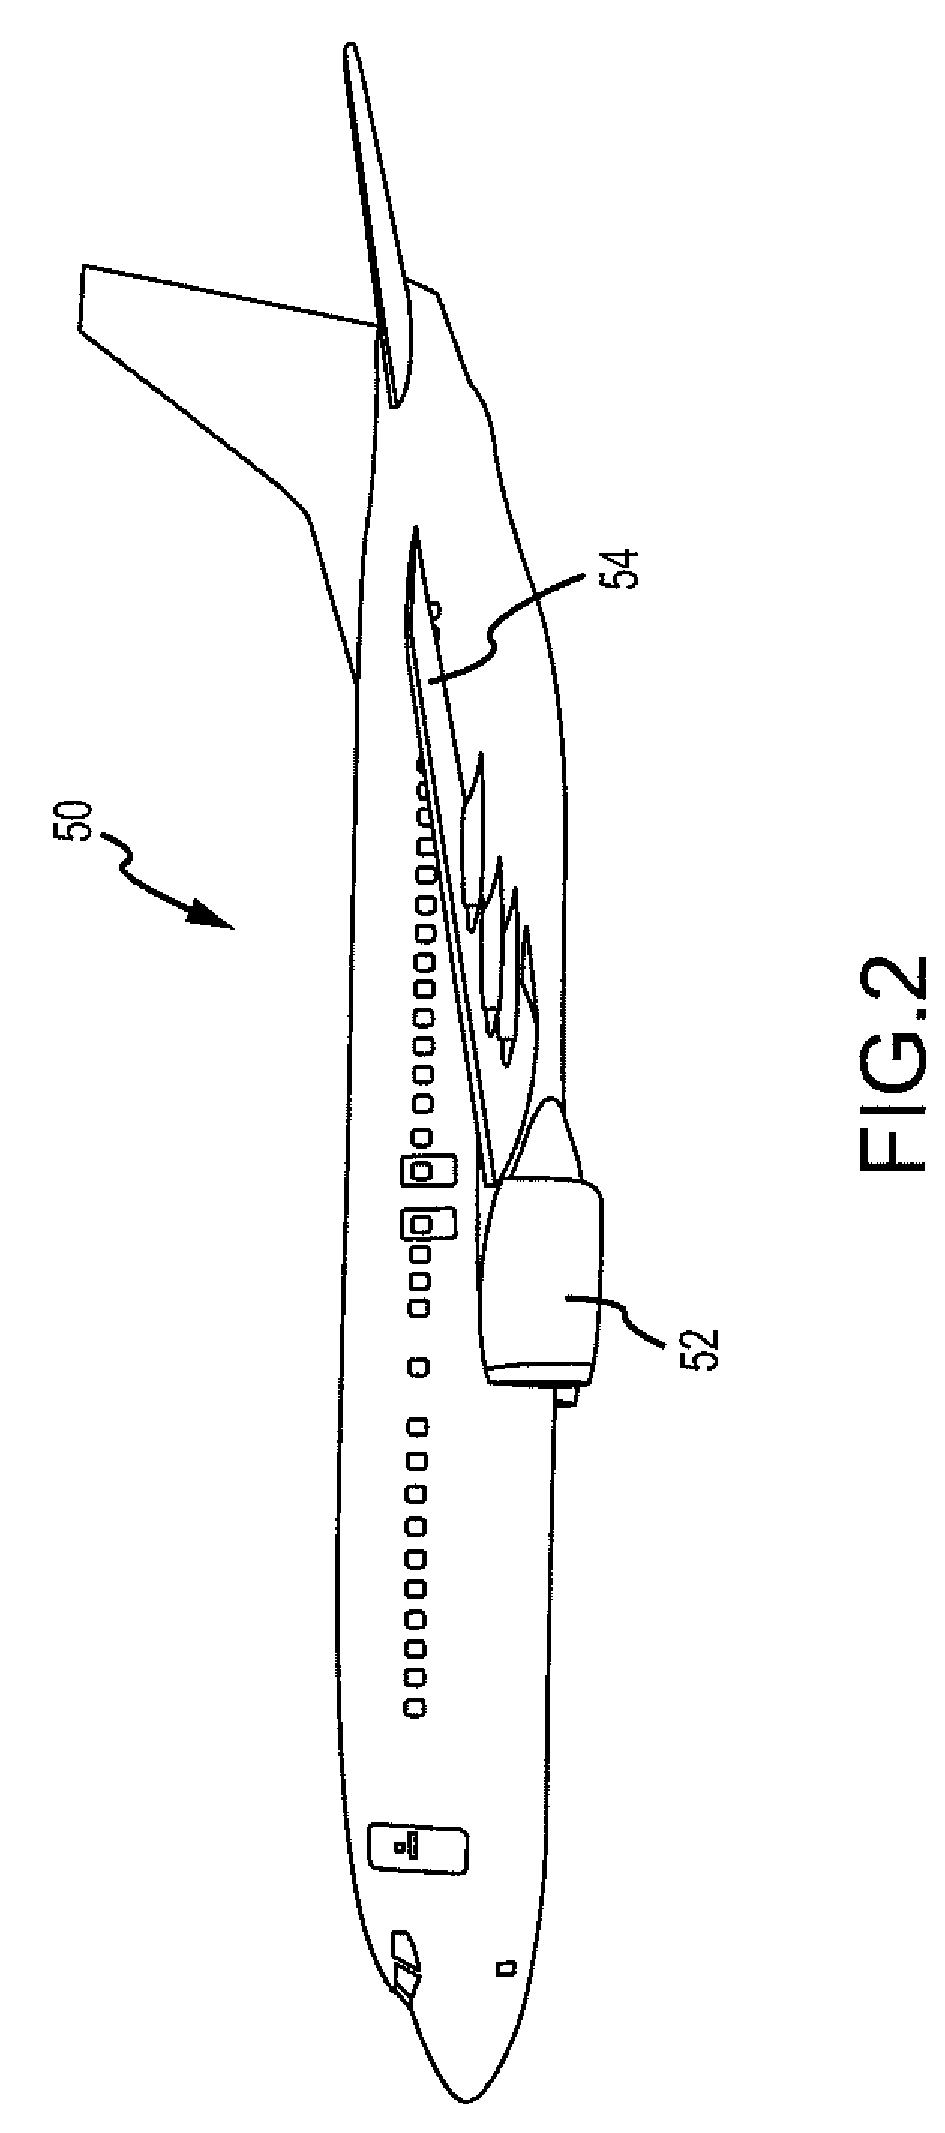 Method of analyzing composite structures